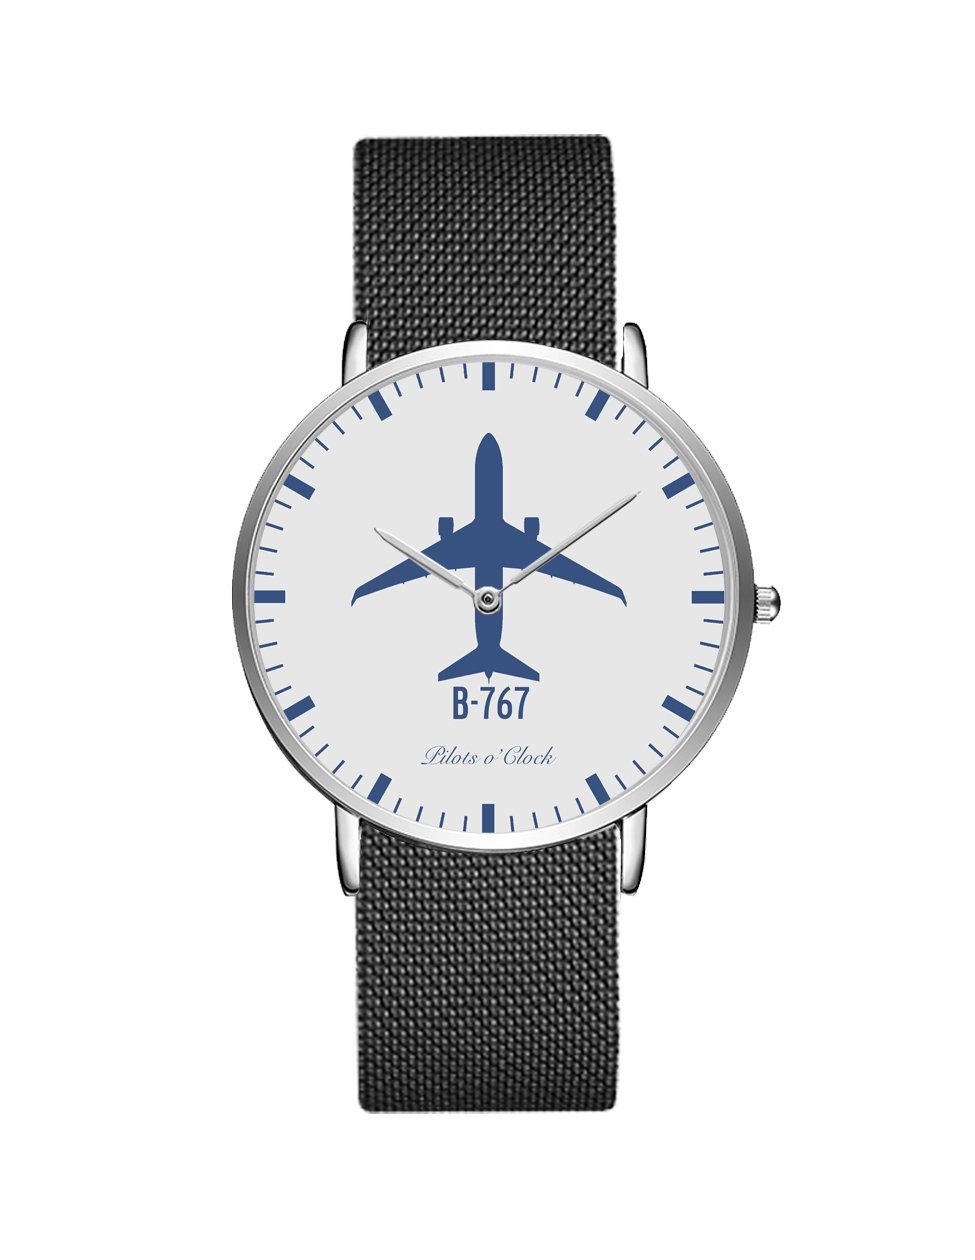 Boeing 767 Stainless Steel Strap Watches Pilot Eyes Store Black & Stainless Steel Strap 